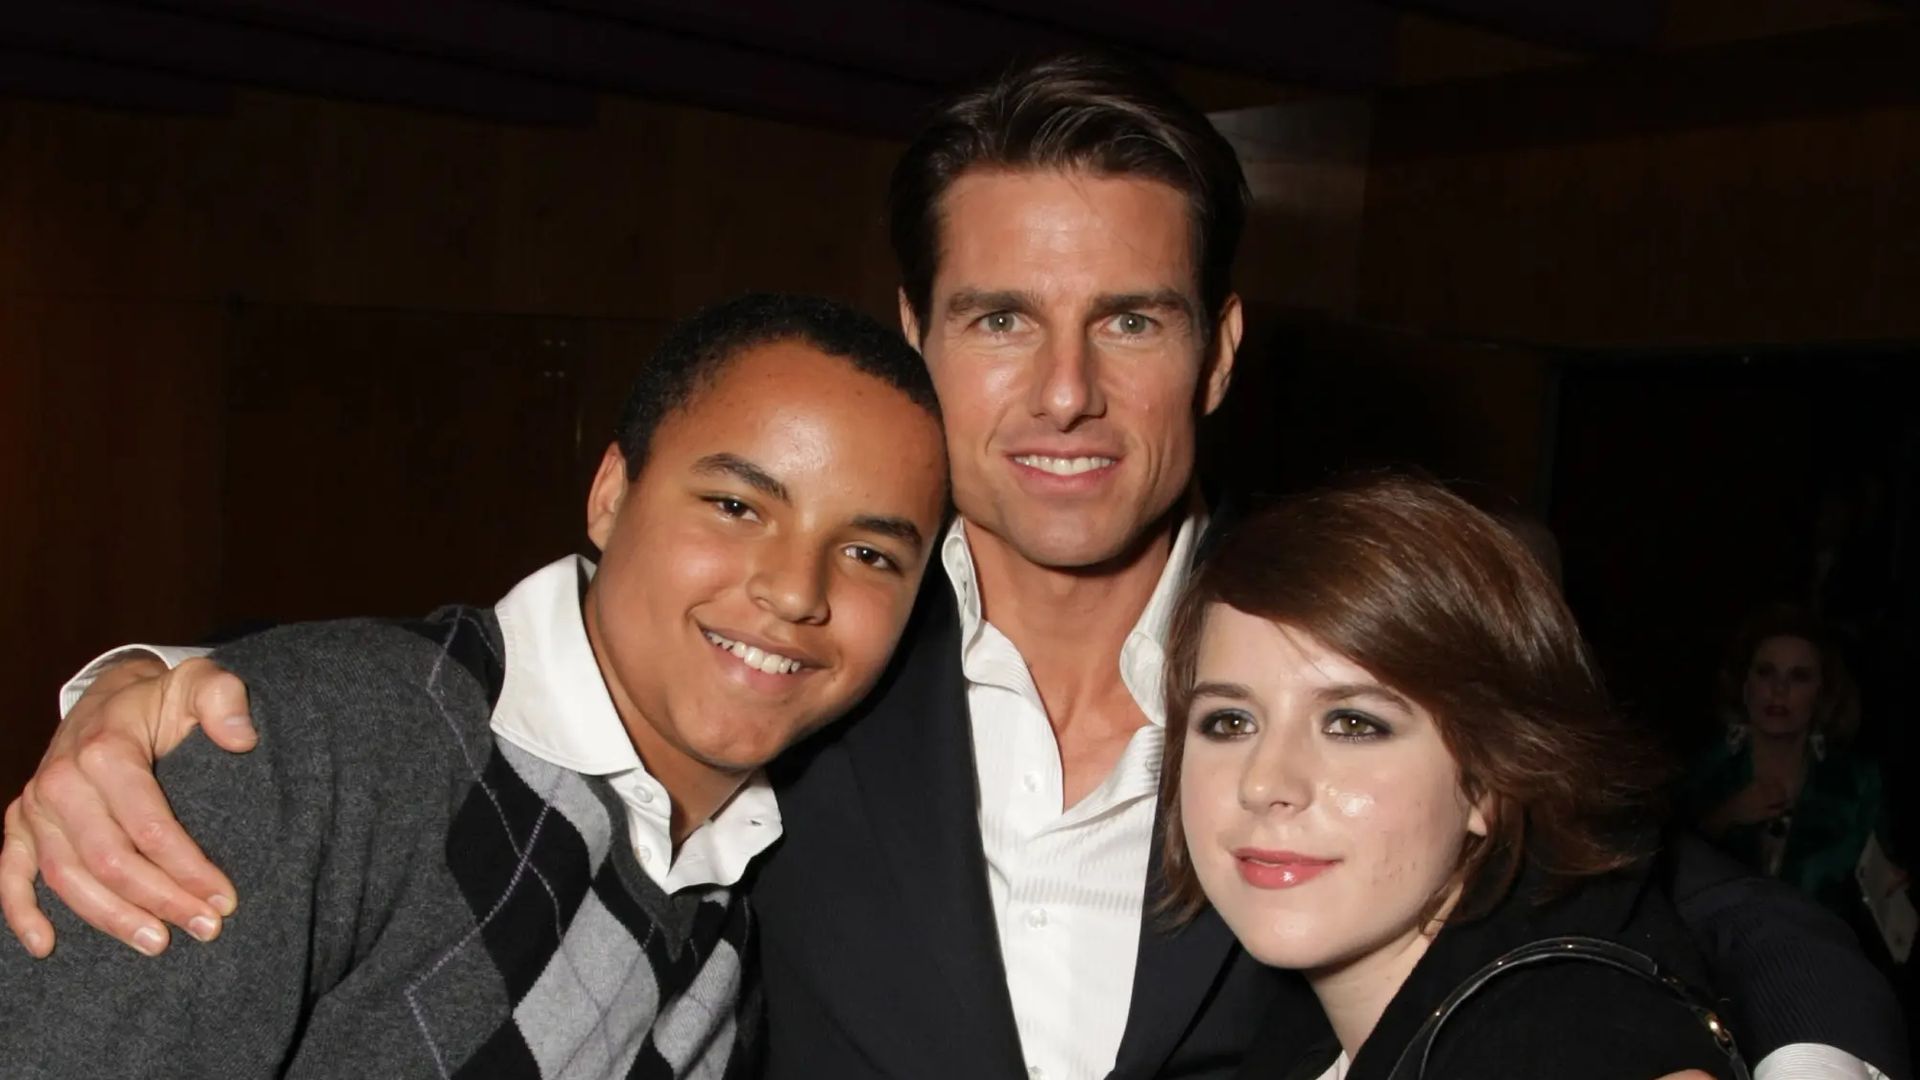 Tom Cruise poses with his and Nicole Kidman’s two kids Connor and Bella in ultra rare photo